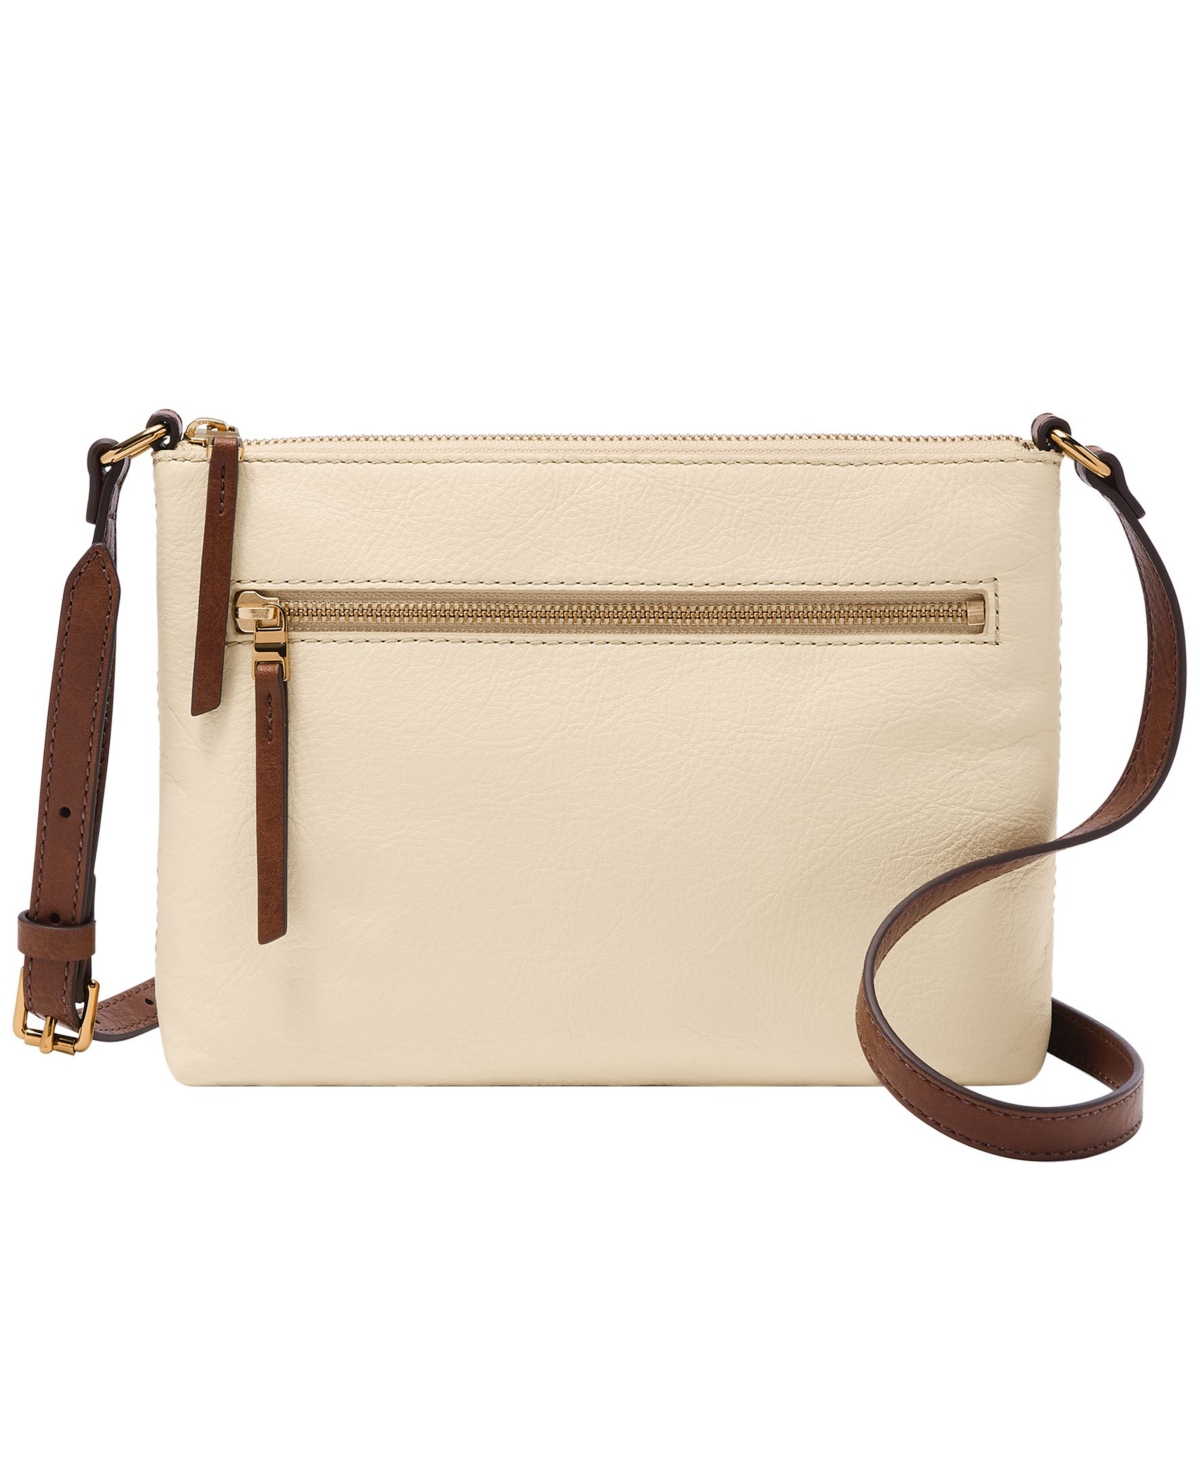 Fossil Heritage Leather Small Flap Crossbody Bag - Macy's